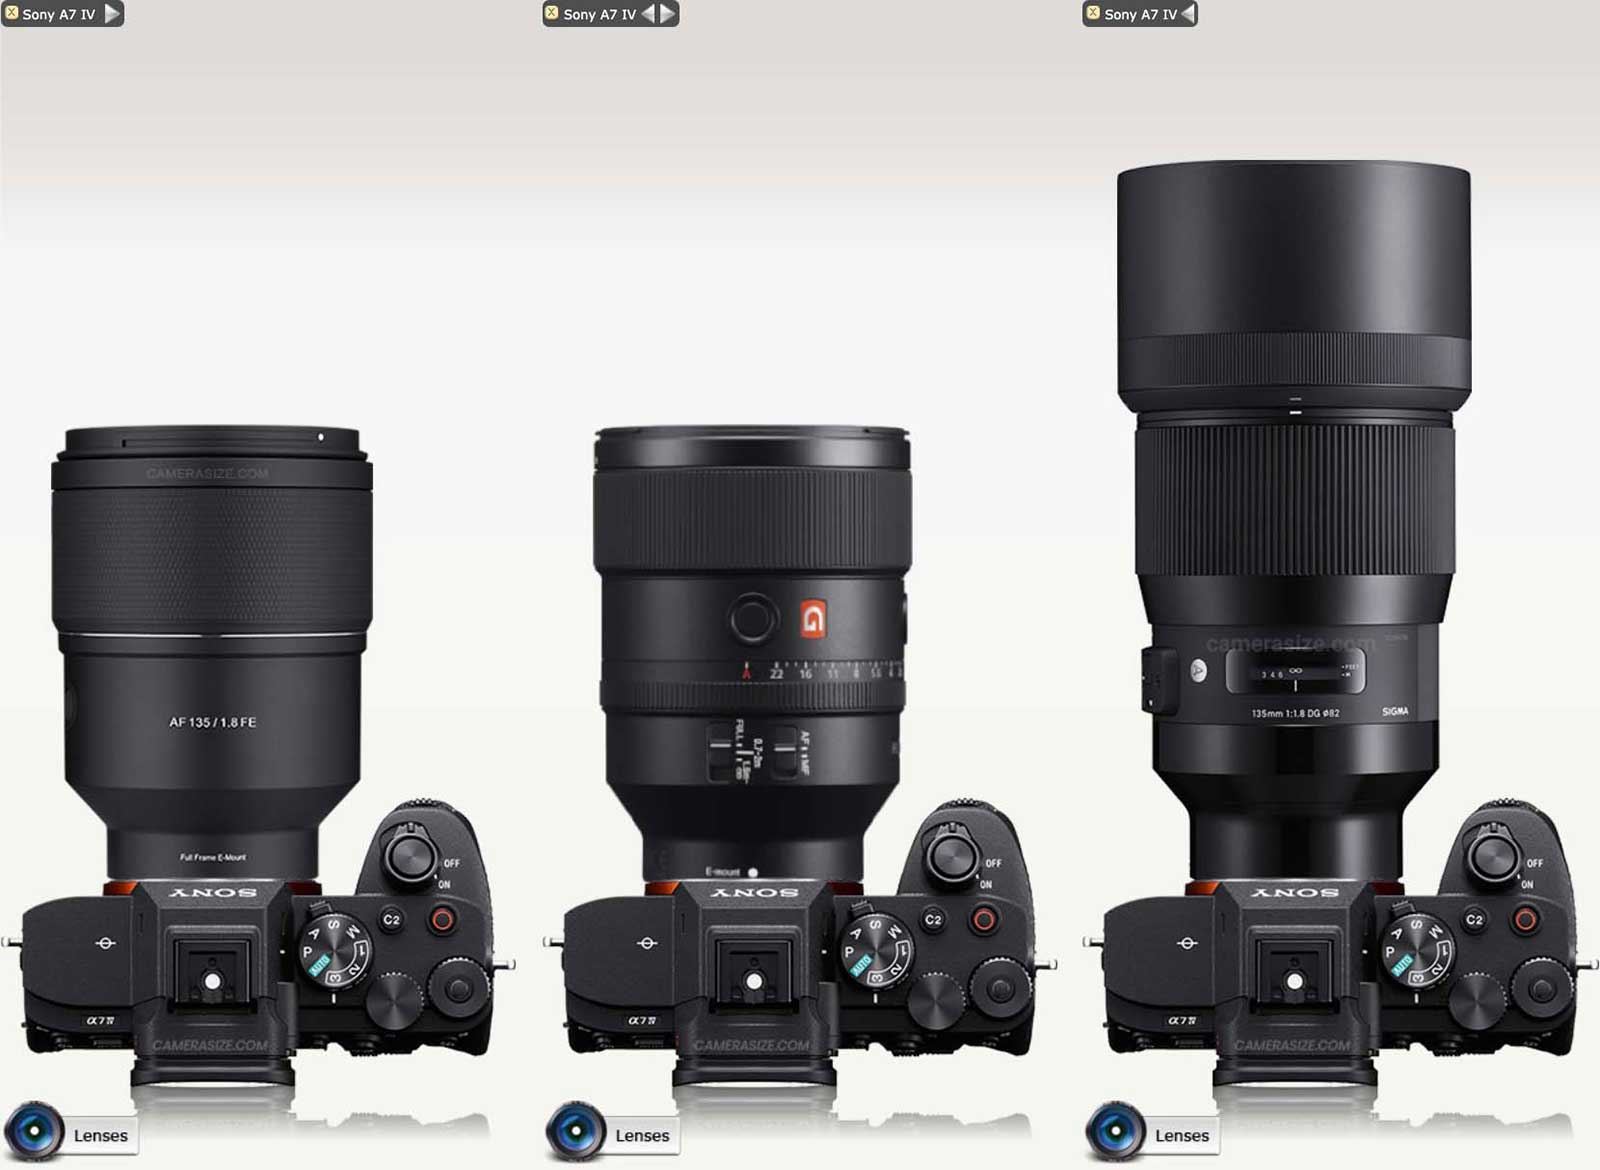 Size comparison taken from Camerasize.com comparing the new Samyang, Sony G-Master and the Sigma ART 135mm lenses (notice that the Sigma has the lens hood attached in this comparison whereas the other two lenses are pictured without.